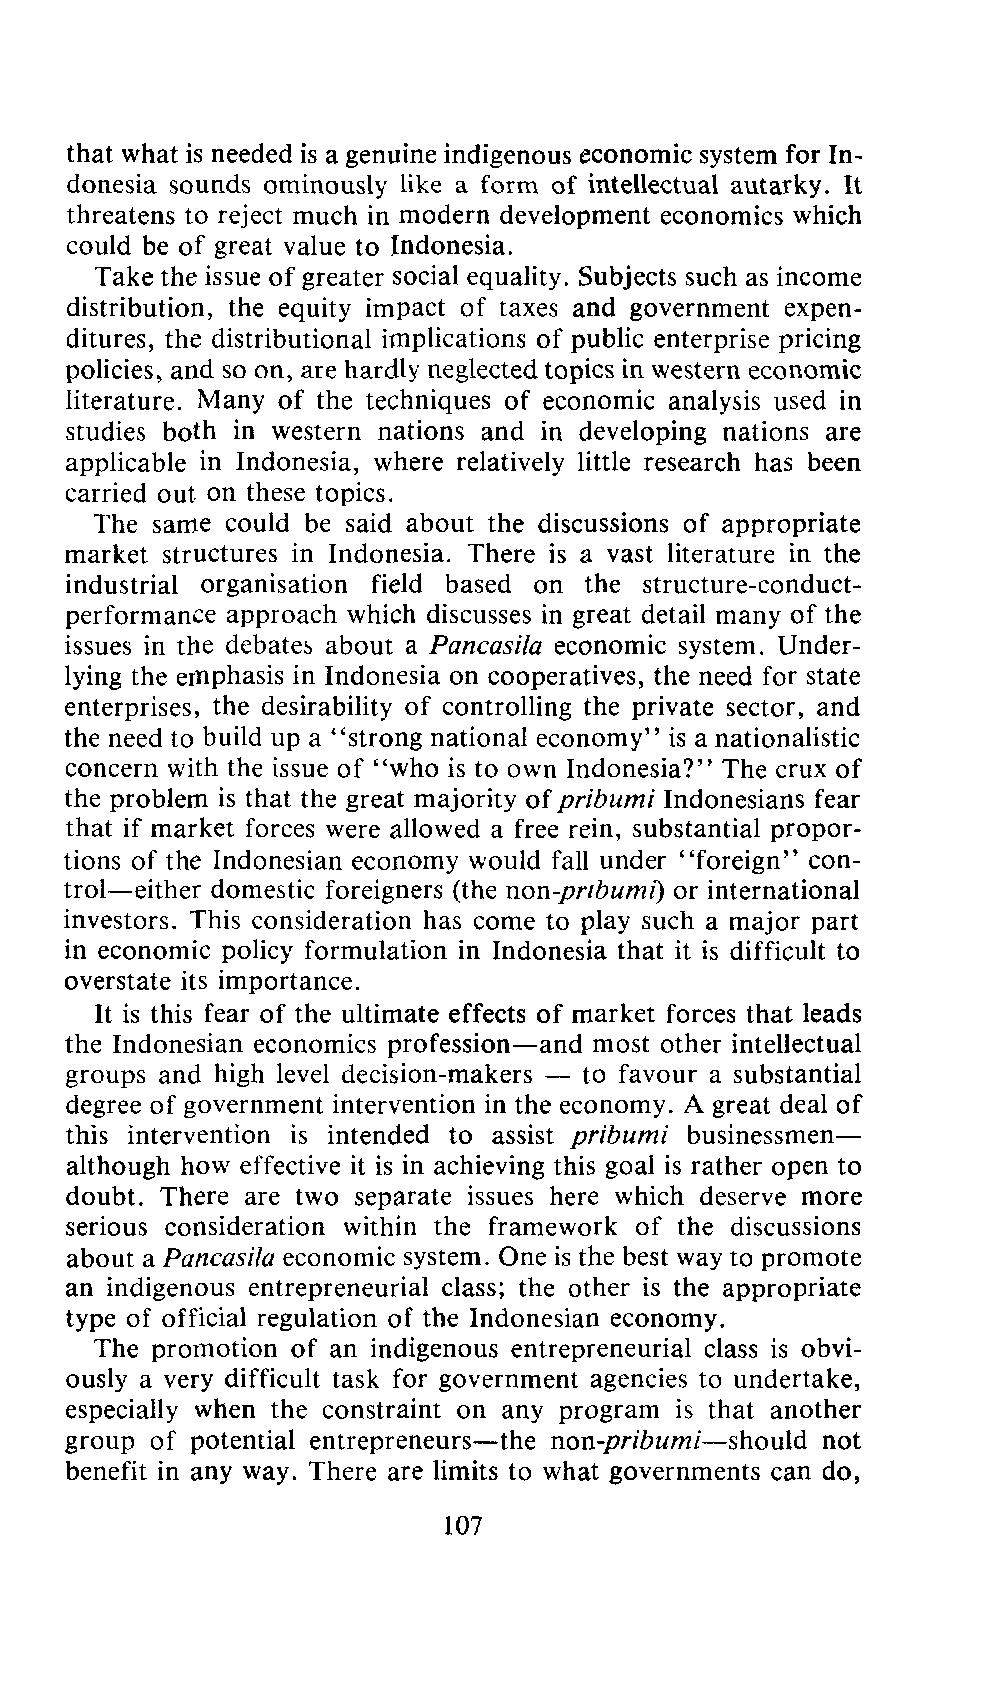 that what is needed is a genuine indigenous economic system for Indonesia sounds ominously like a form of intellectual autarky.